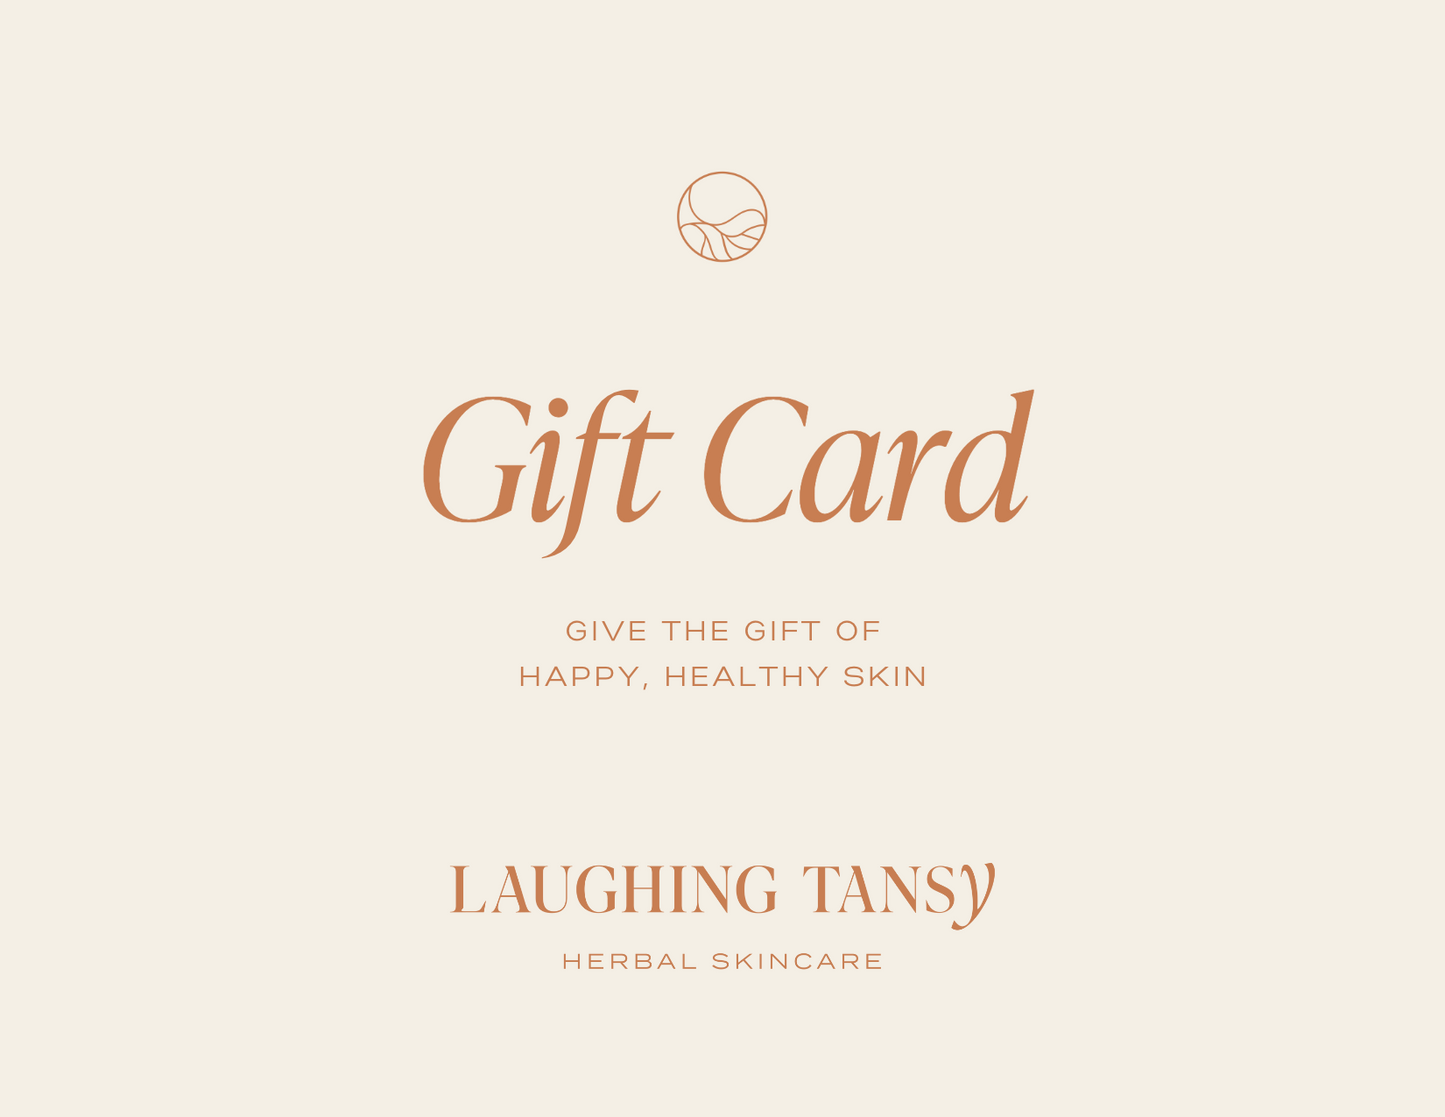 Laughing Tansy Gift Card